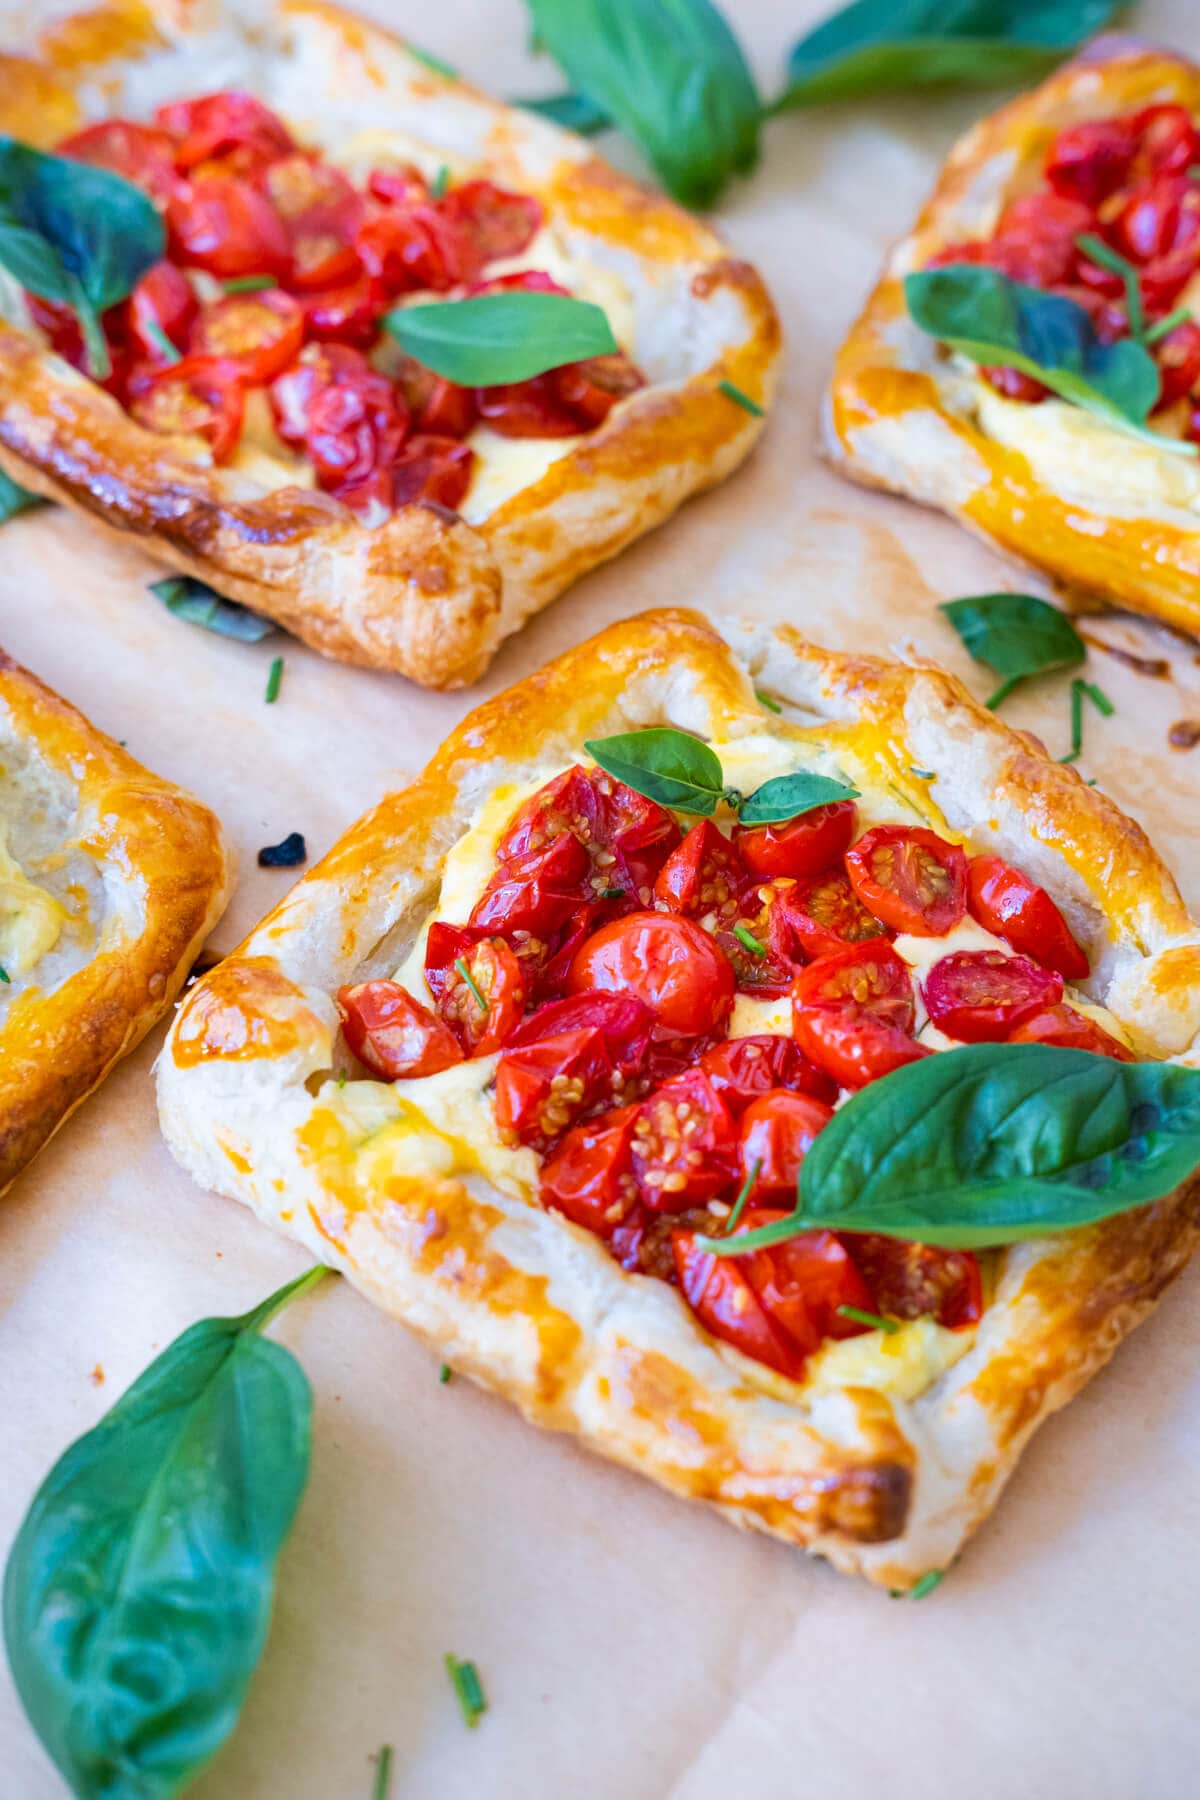 Savory tarts on parchment paper and topped with basil leaves and cherry tomatos.